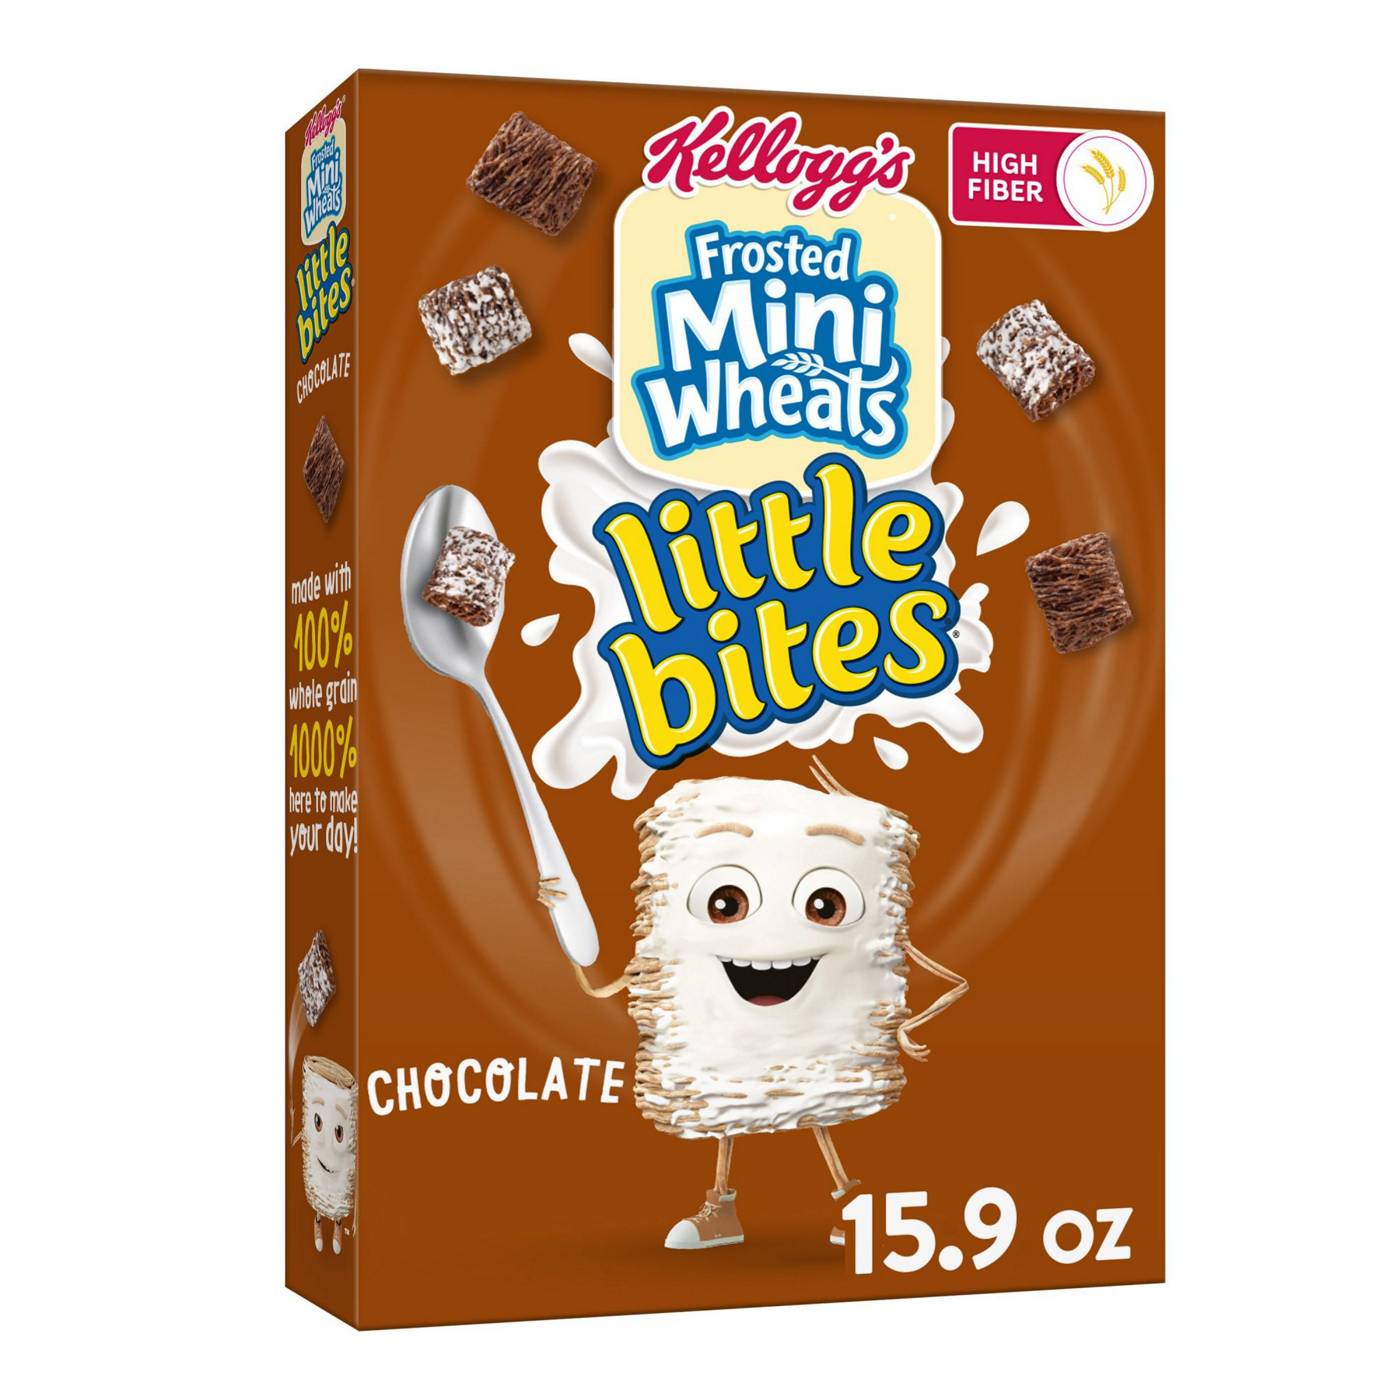 Kellogg's Frosted Mini-Wheats Little Bites Chocolate Cold Breakfast Cereal; image 1 of 5